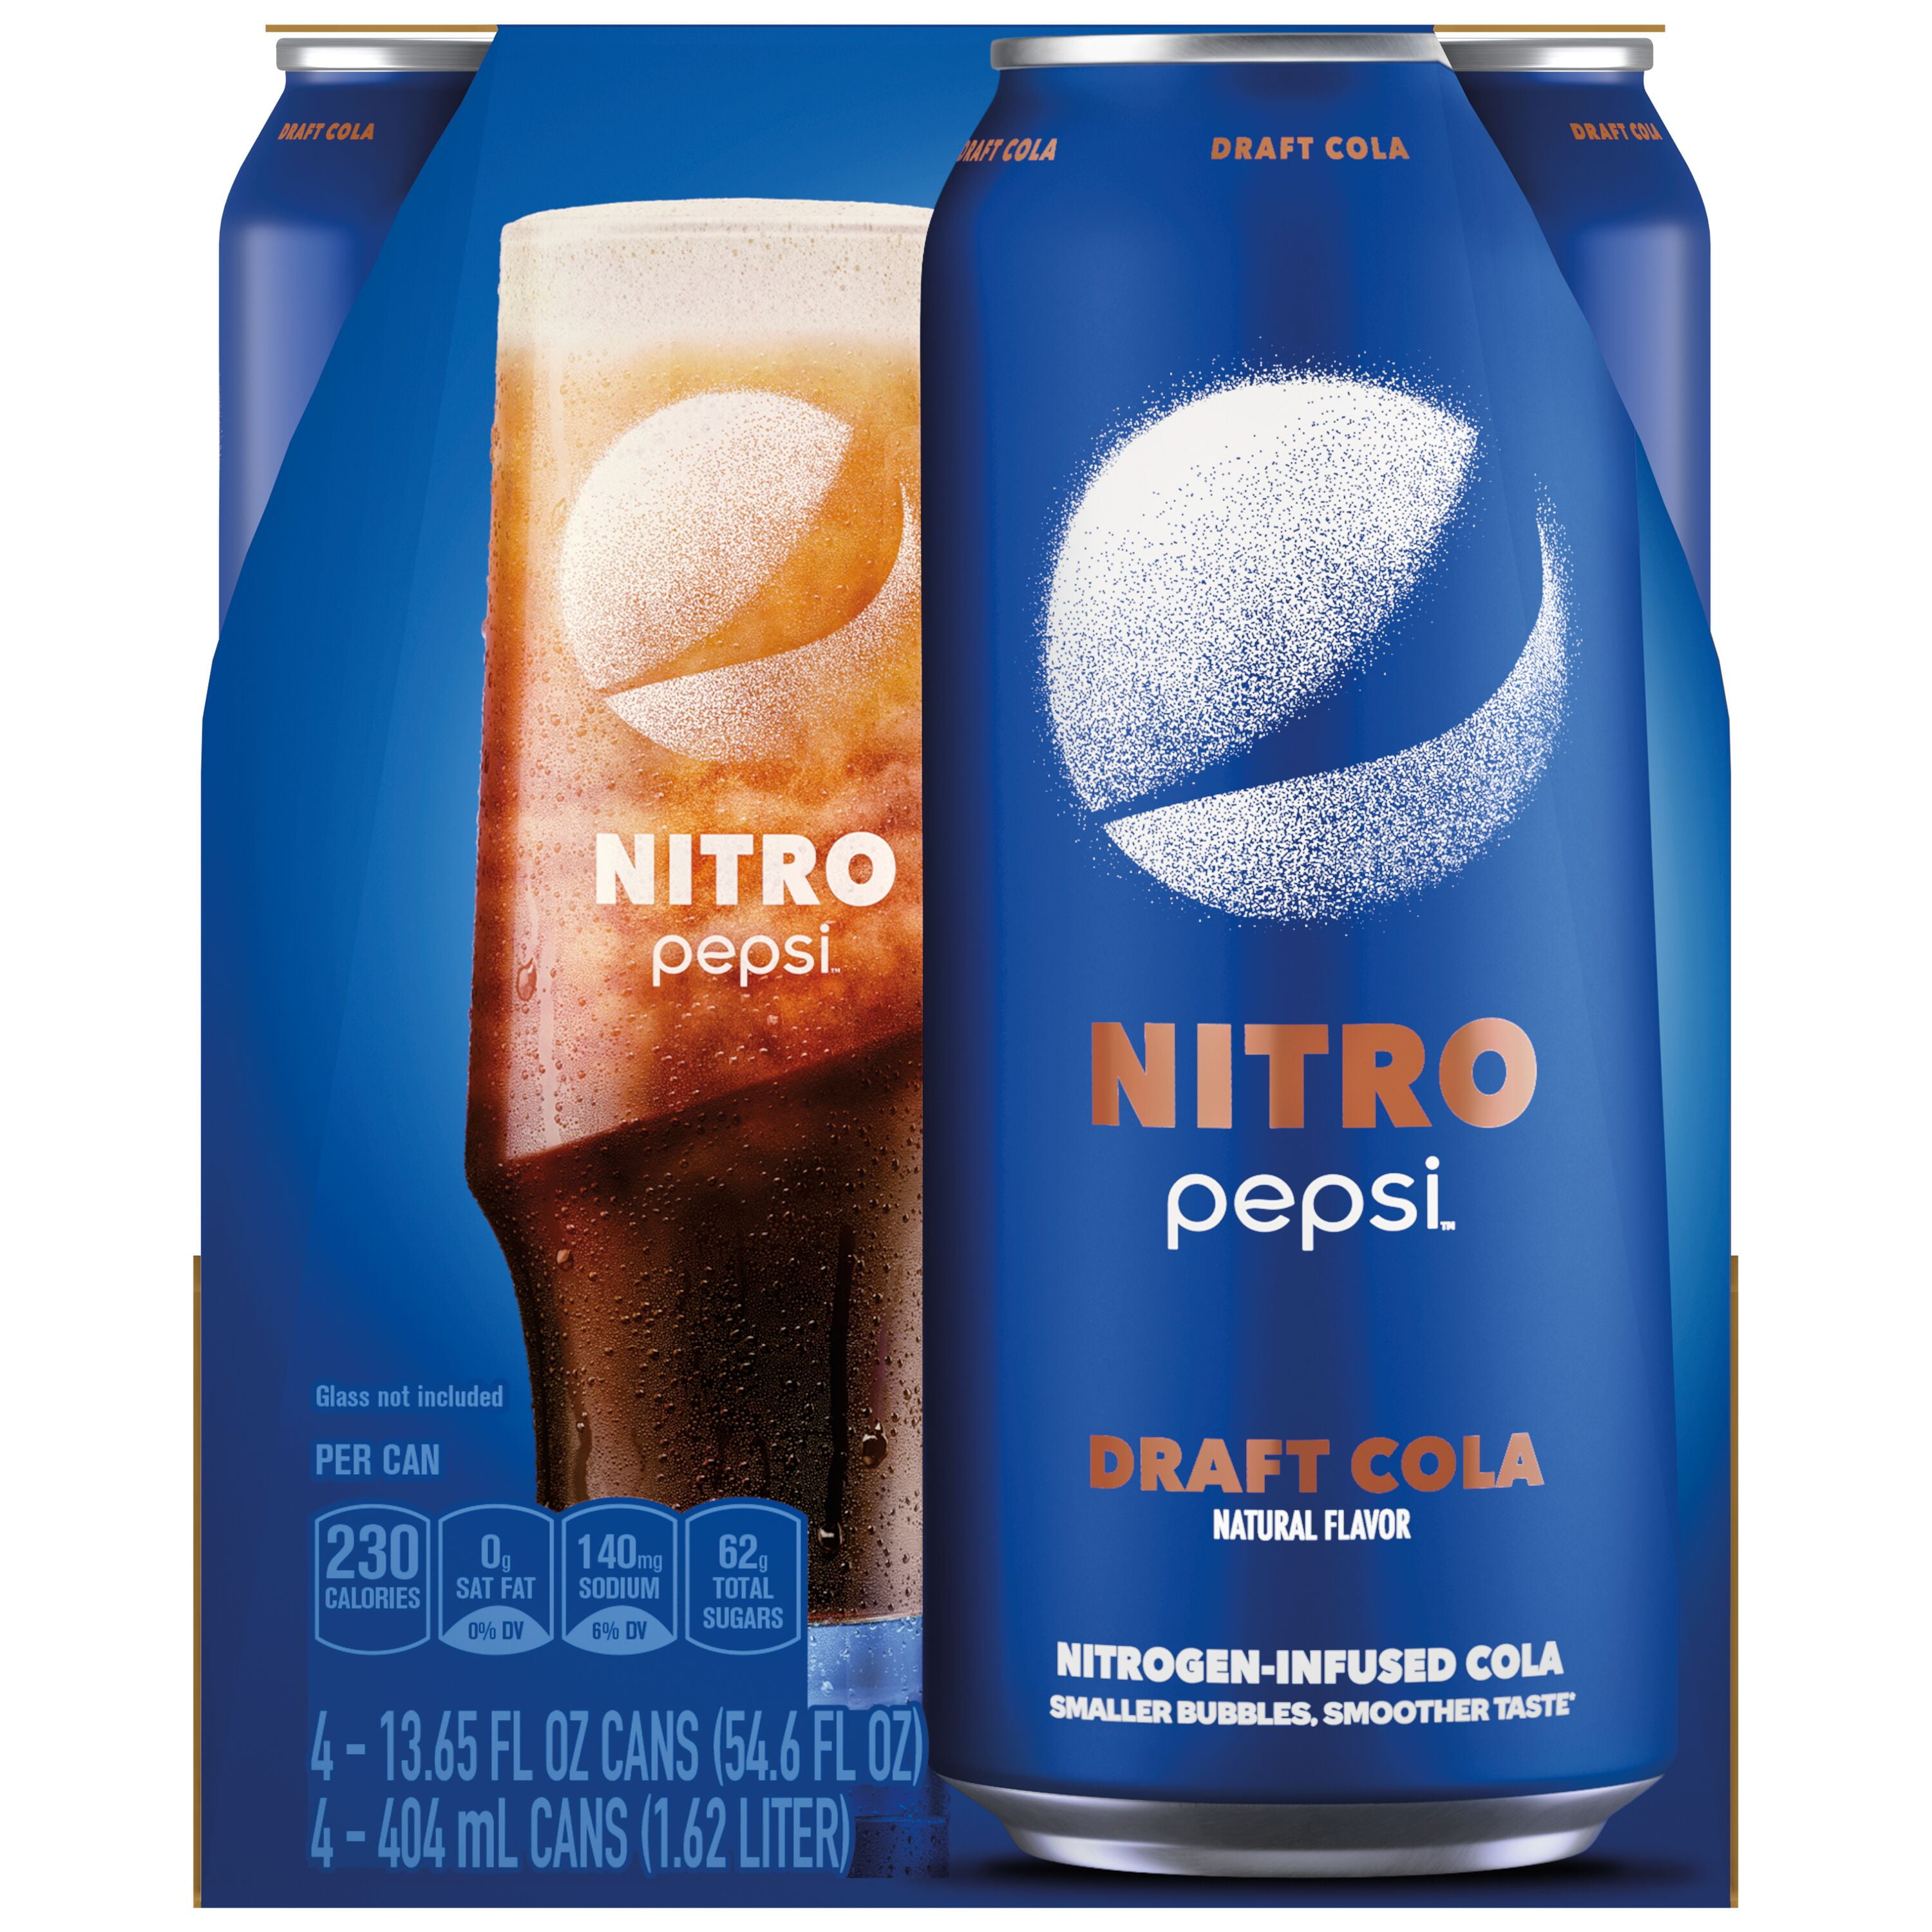 PEPSI® Launches NITRO PEPSI™, The First-Ever Nitrogen-Infused Cola